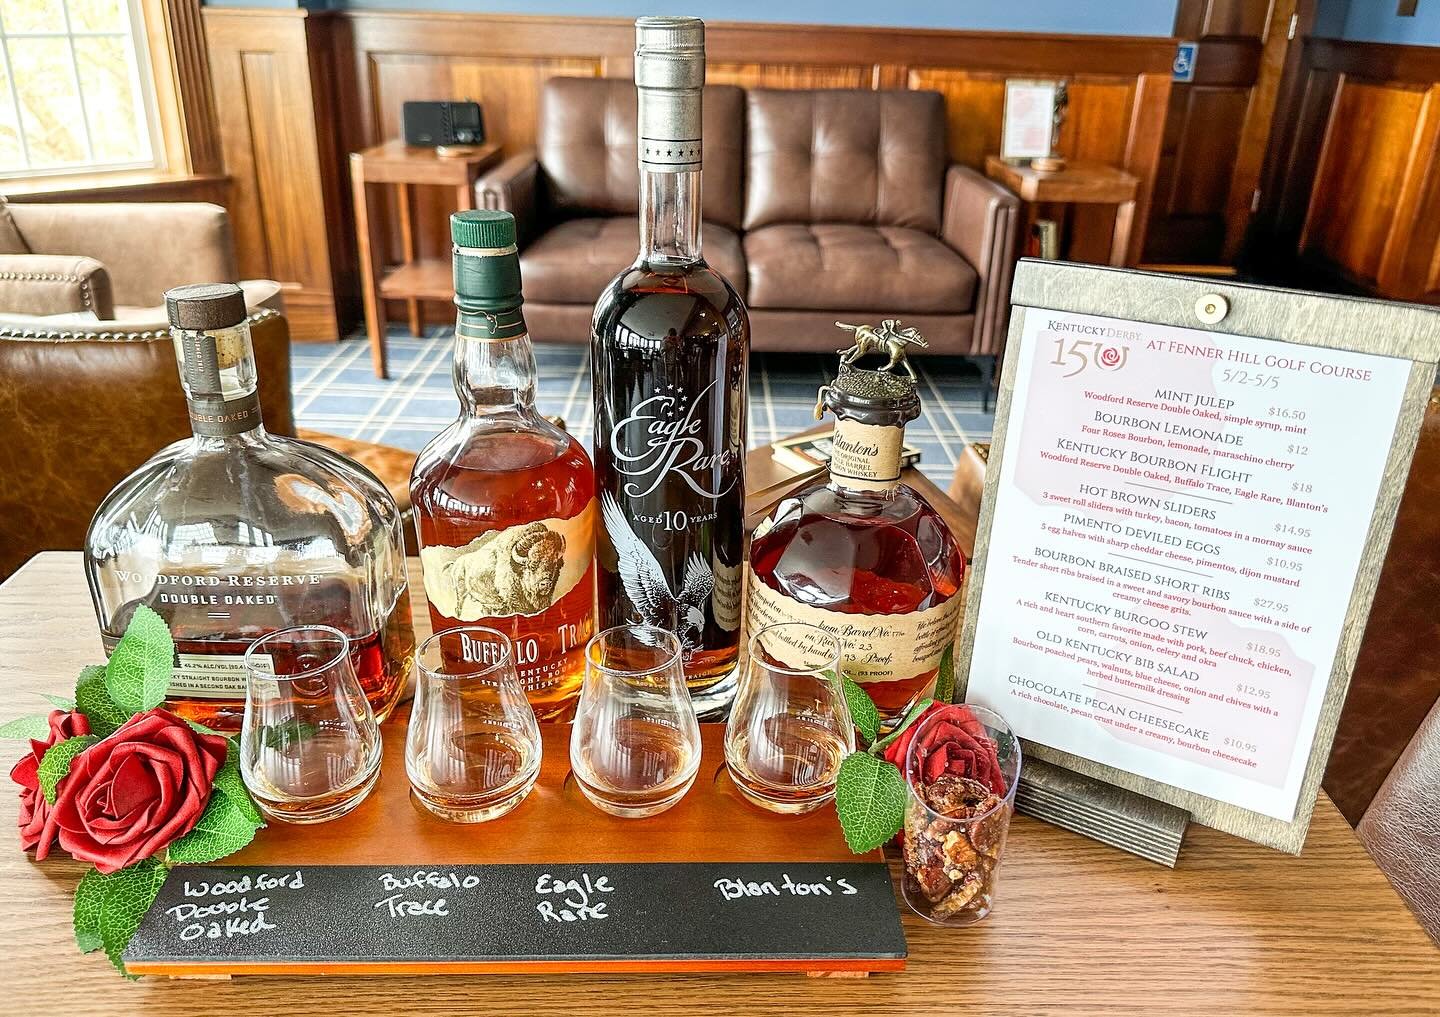 🏇🌹 We&rsquo;re celebrating the Derby all weekend long here at Fenner! 🌹🐎

Come on down and taste test some delicious Kentucky Bourbons with our Bourbon Flights and enjoy some southern favorites like Short Ribs and Burgoo Stew!